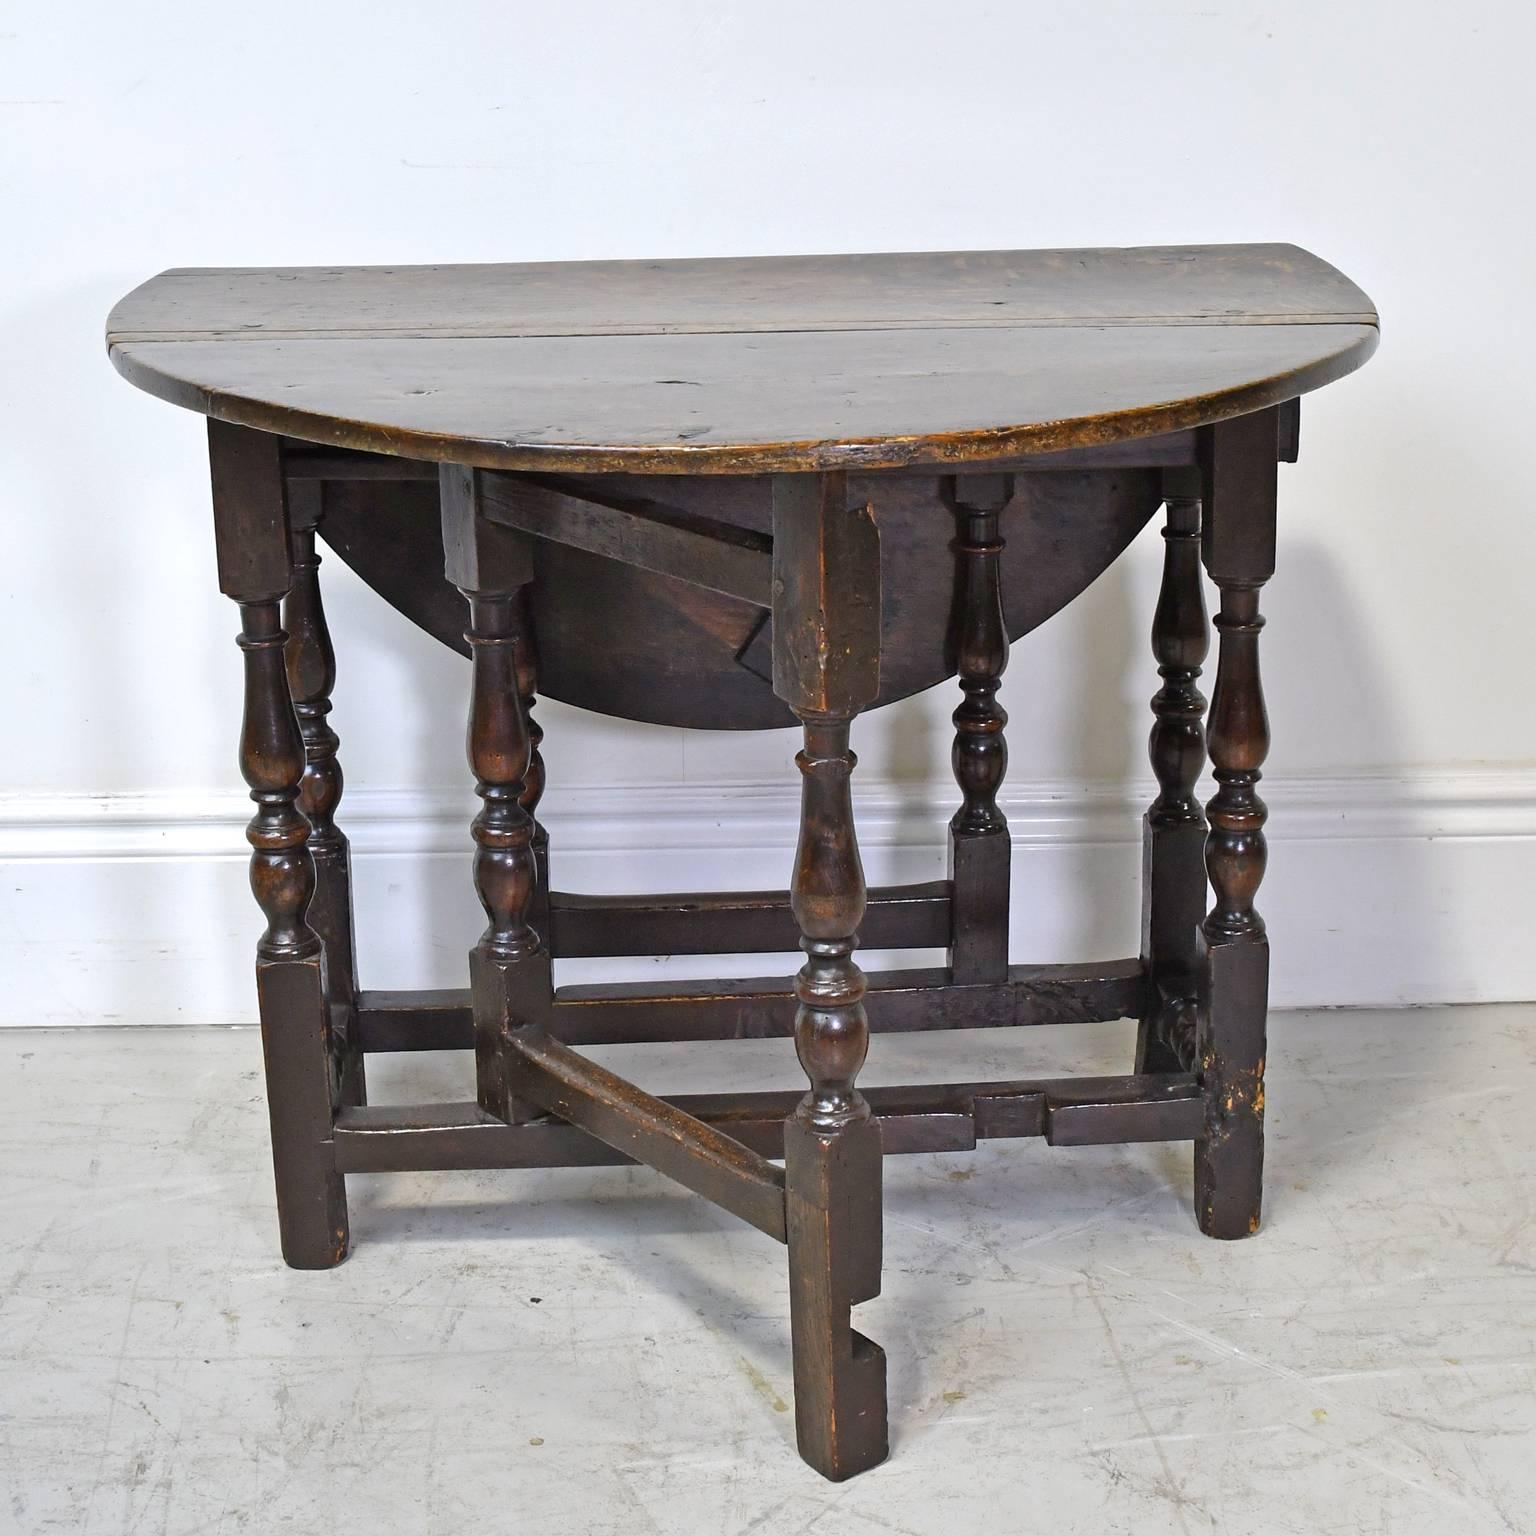 Baroque 18th Century Small Gate-leg Dining or Sofa Table in Oak